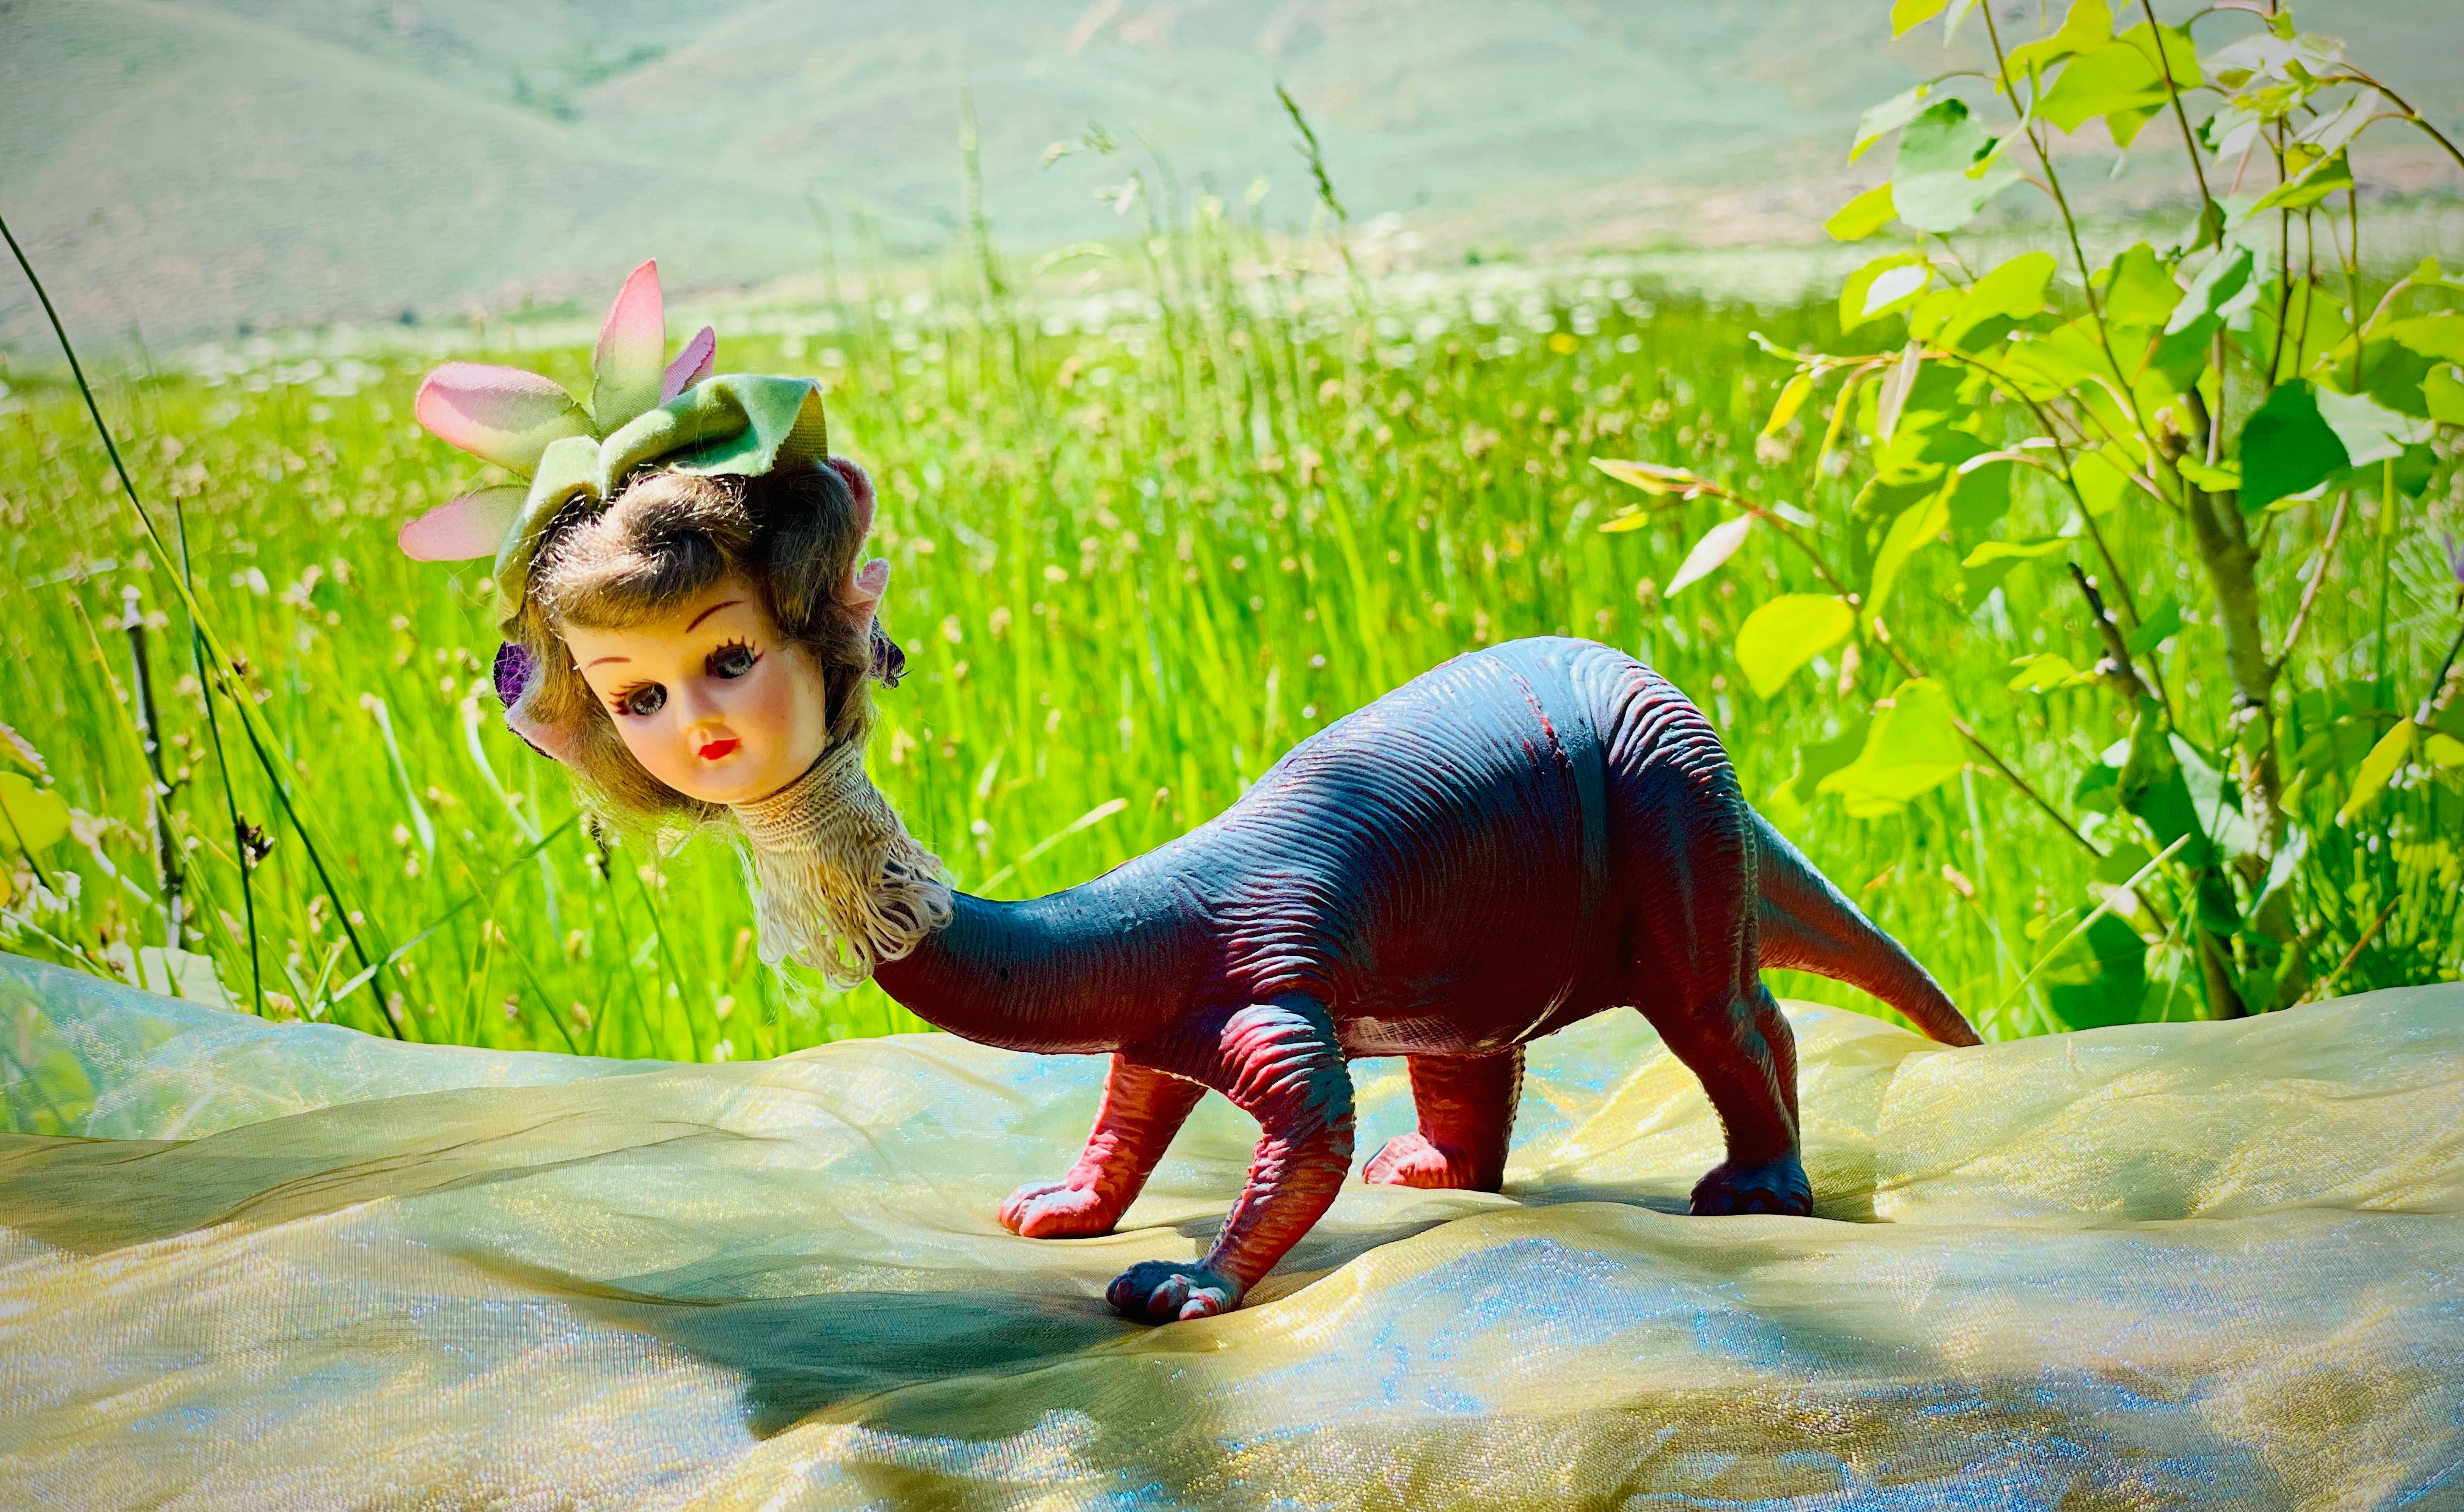 Vintage dinosaur body with vintage doll head, felt hat and flower, ornate neck trim. 7" long 3" tall 2" wide. Displayed on gold gauze. Green grass in the background